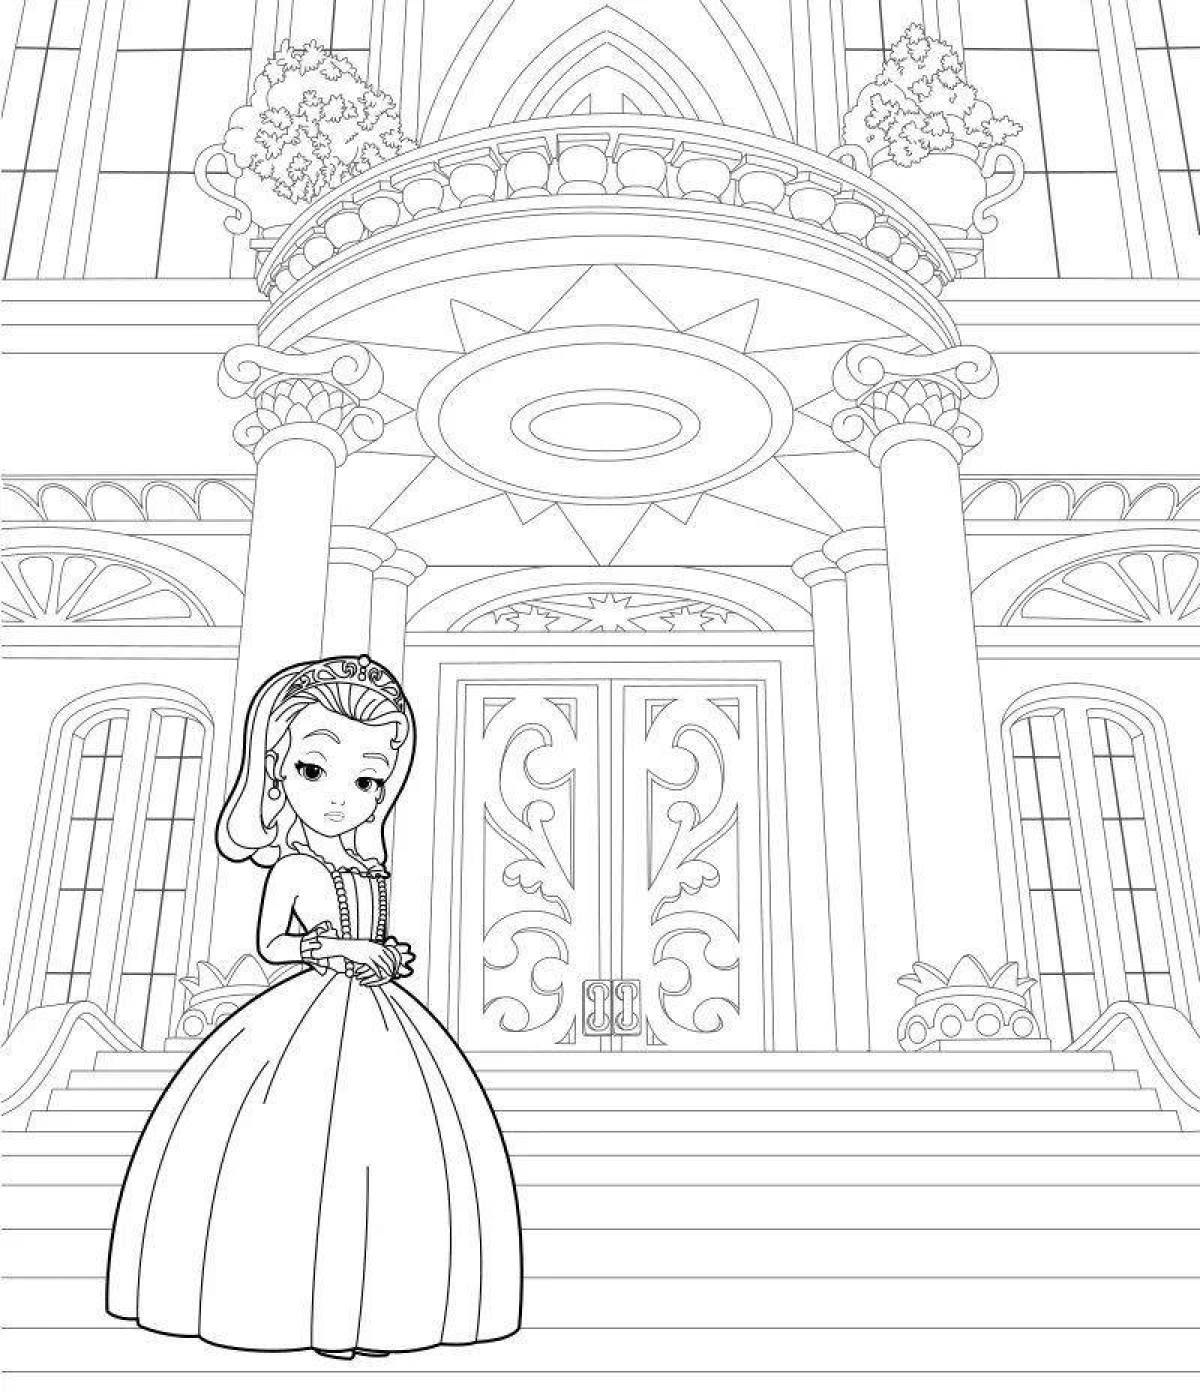 Exquisite coloring princess in the castle